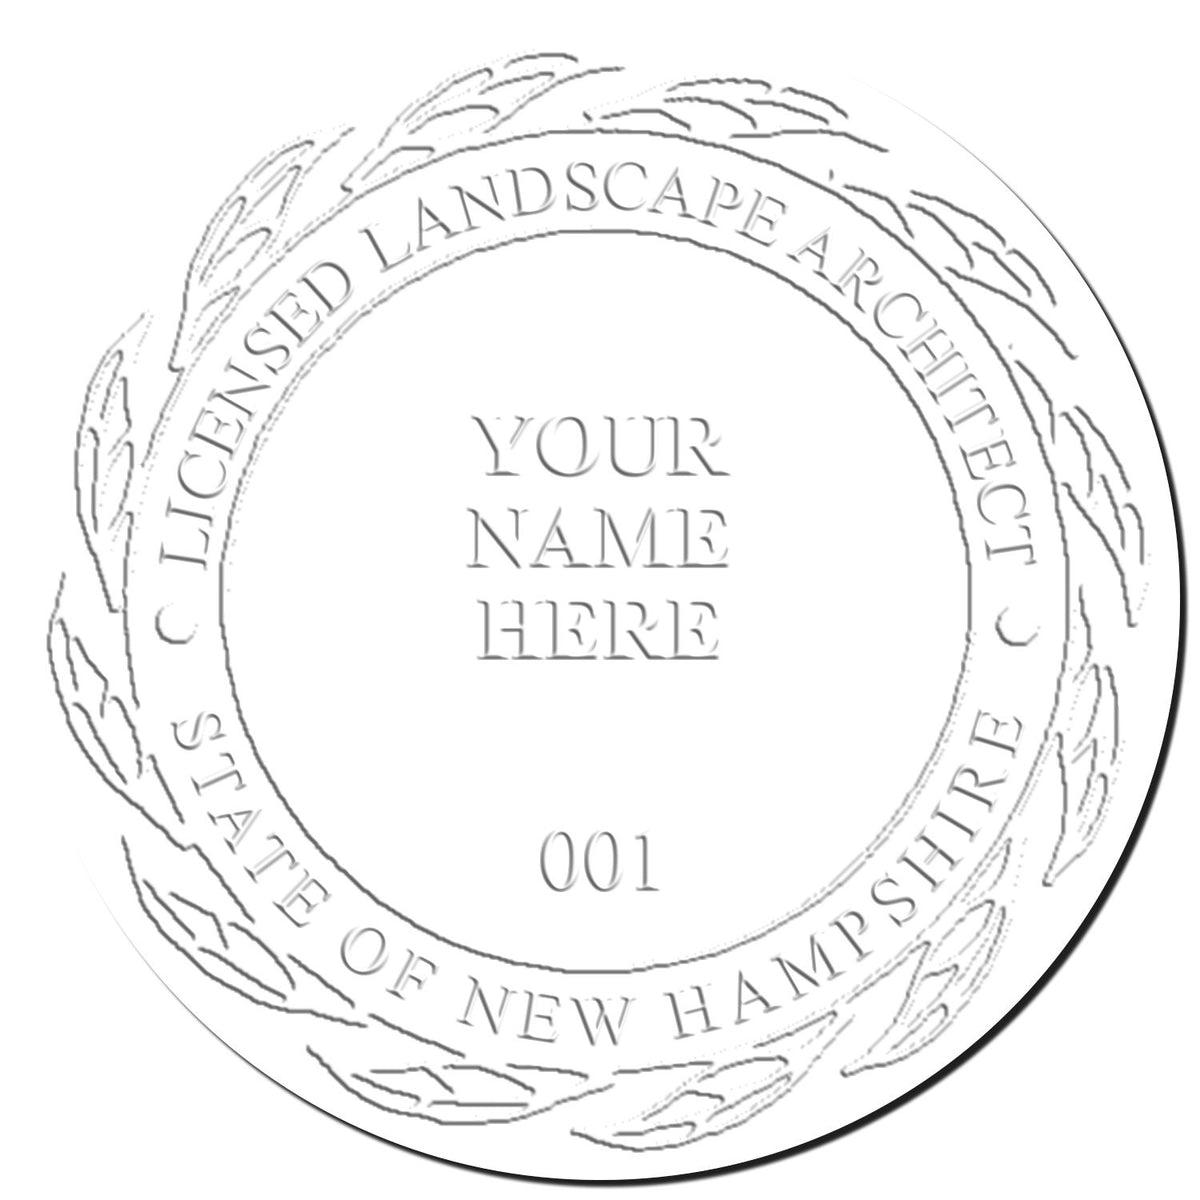 This paper is stamped with a sample imprint of the Soft Pocket New Hampshire Landscape Architect Embosser, signifying its quality and reliability.